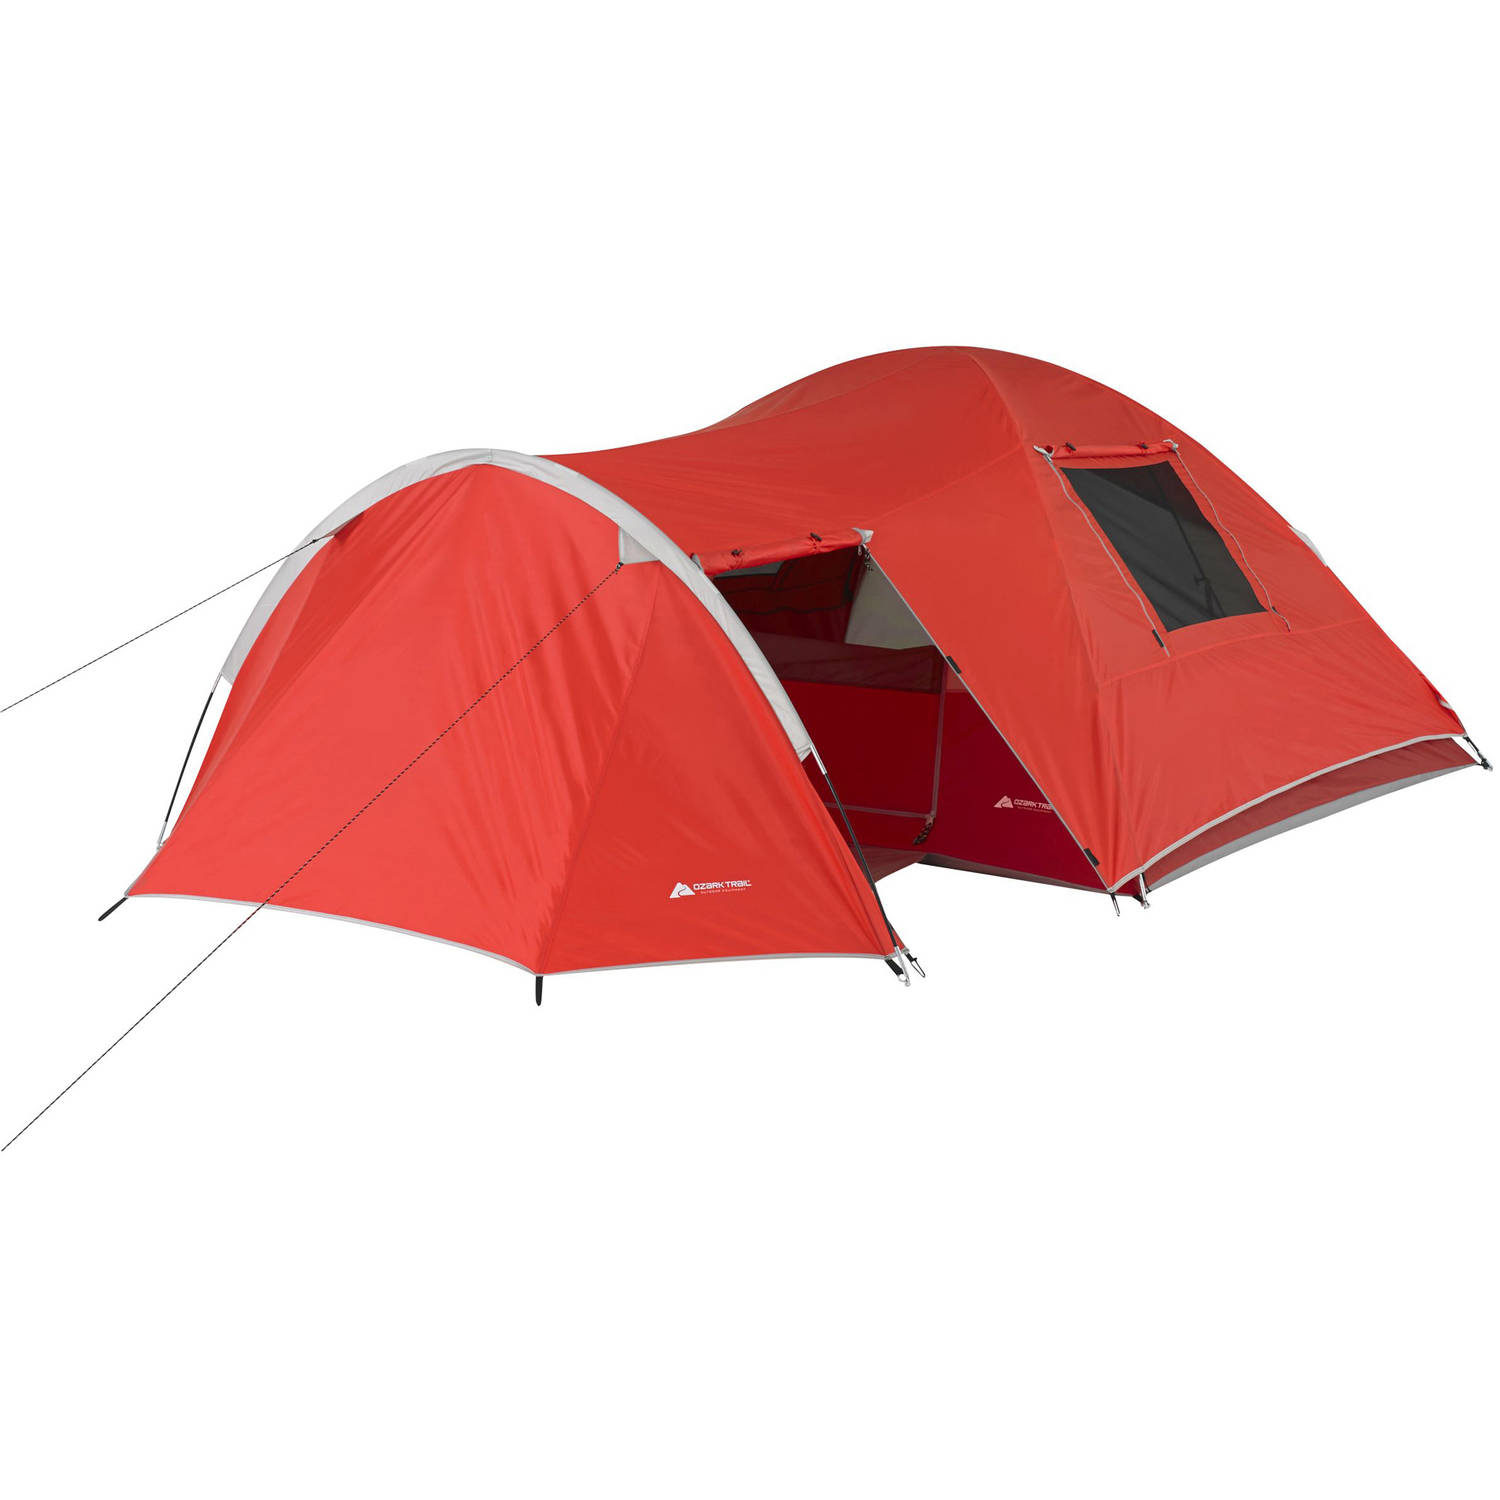 Ozark Trail 4-Person Dome Tent, with Vestibule and Full Coverage Fly - image 1 of 6